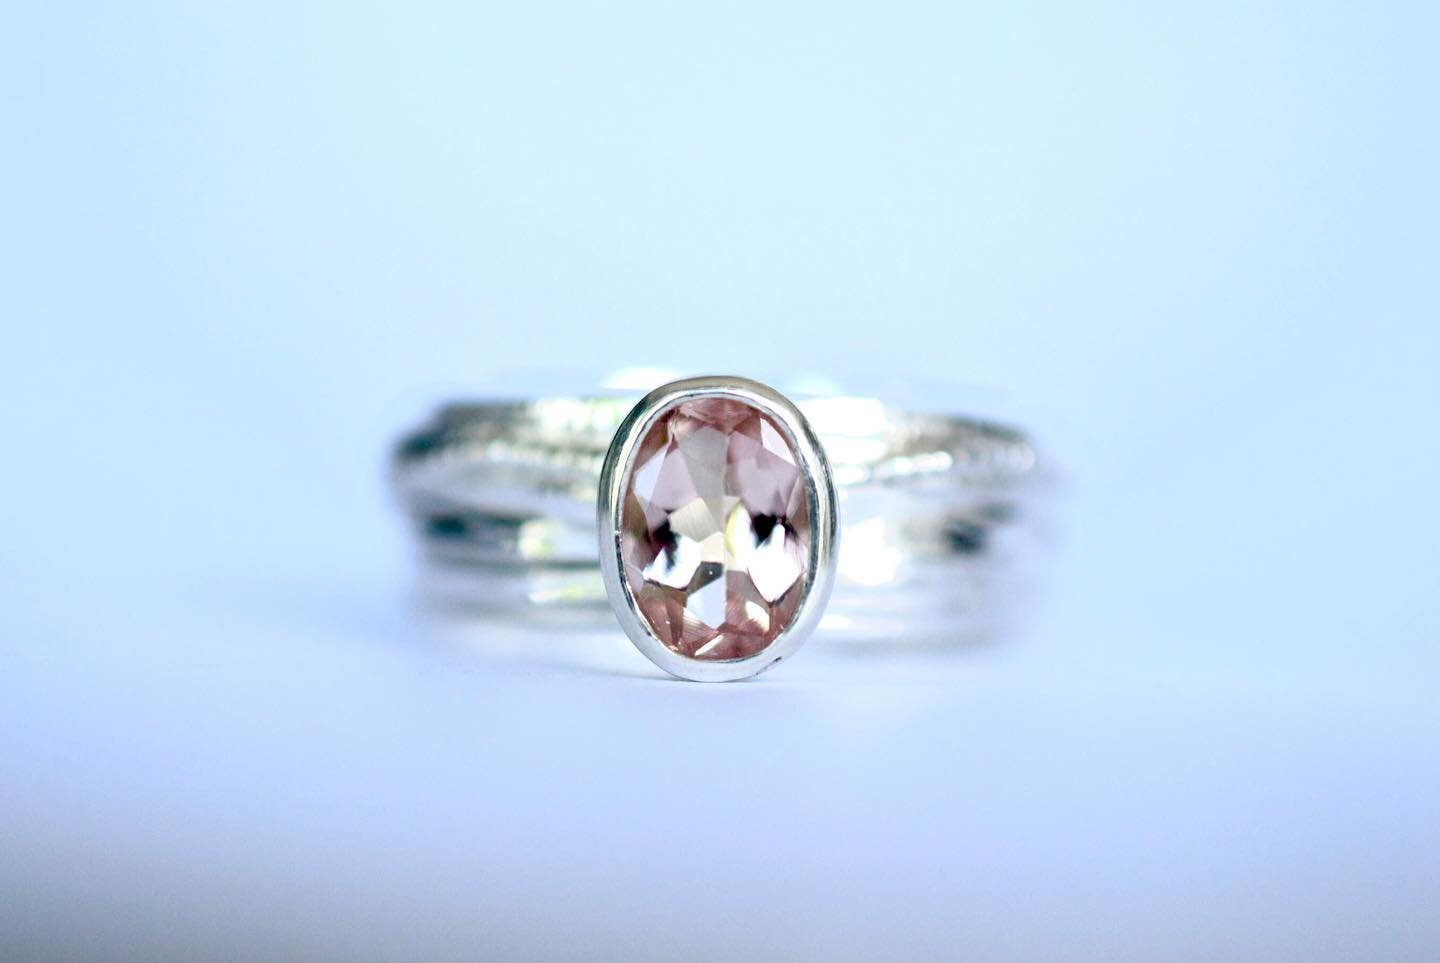 The summer holidays mean that jewellery making is very slow at the moment but I&rsquo;m managing to find some time to continue with orders. This morganite ring was finished recently. The soft pink is really one of my favourites! 
.
.
#pink #blush #st